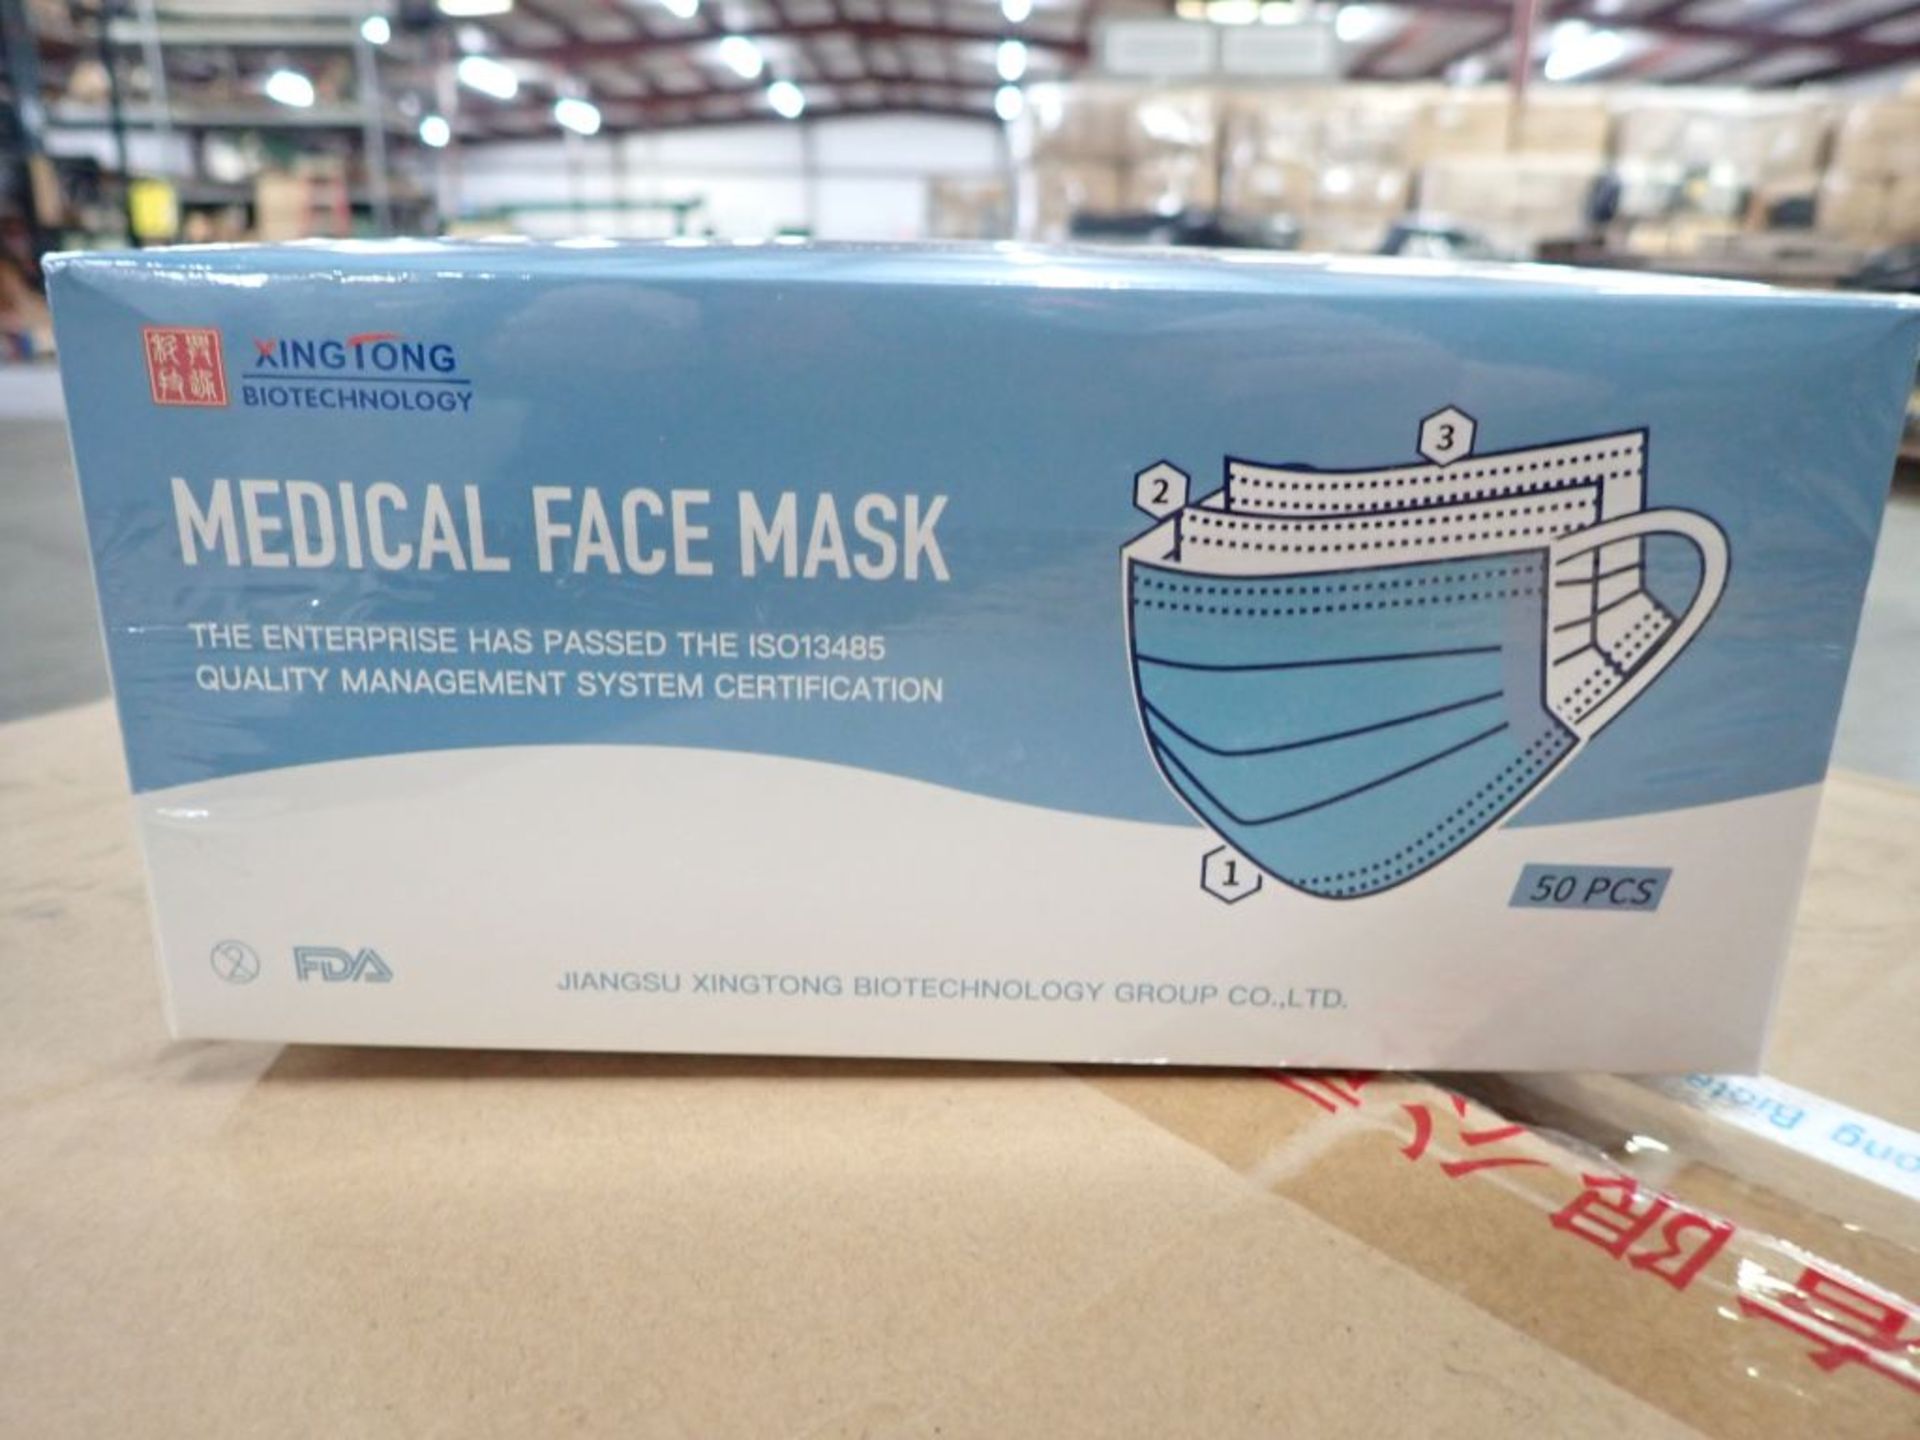 Lot of (60,000) Medical Face Mask - Image 2 of 5